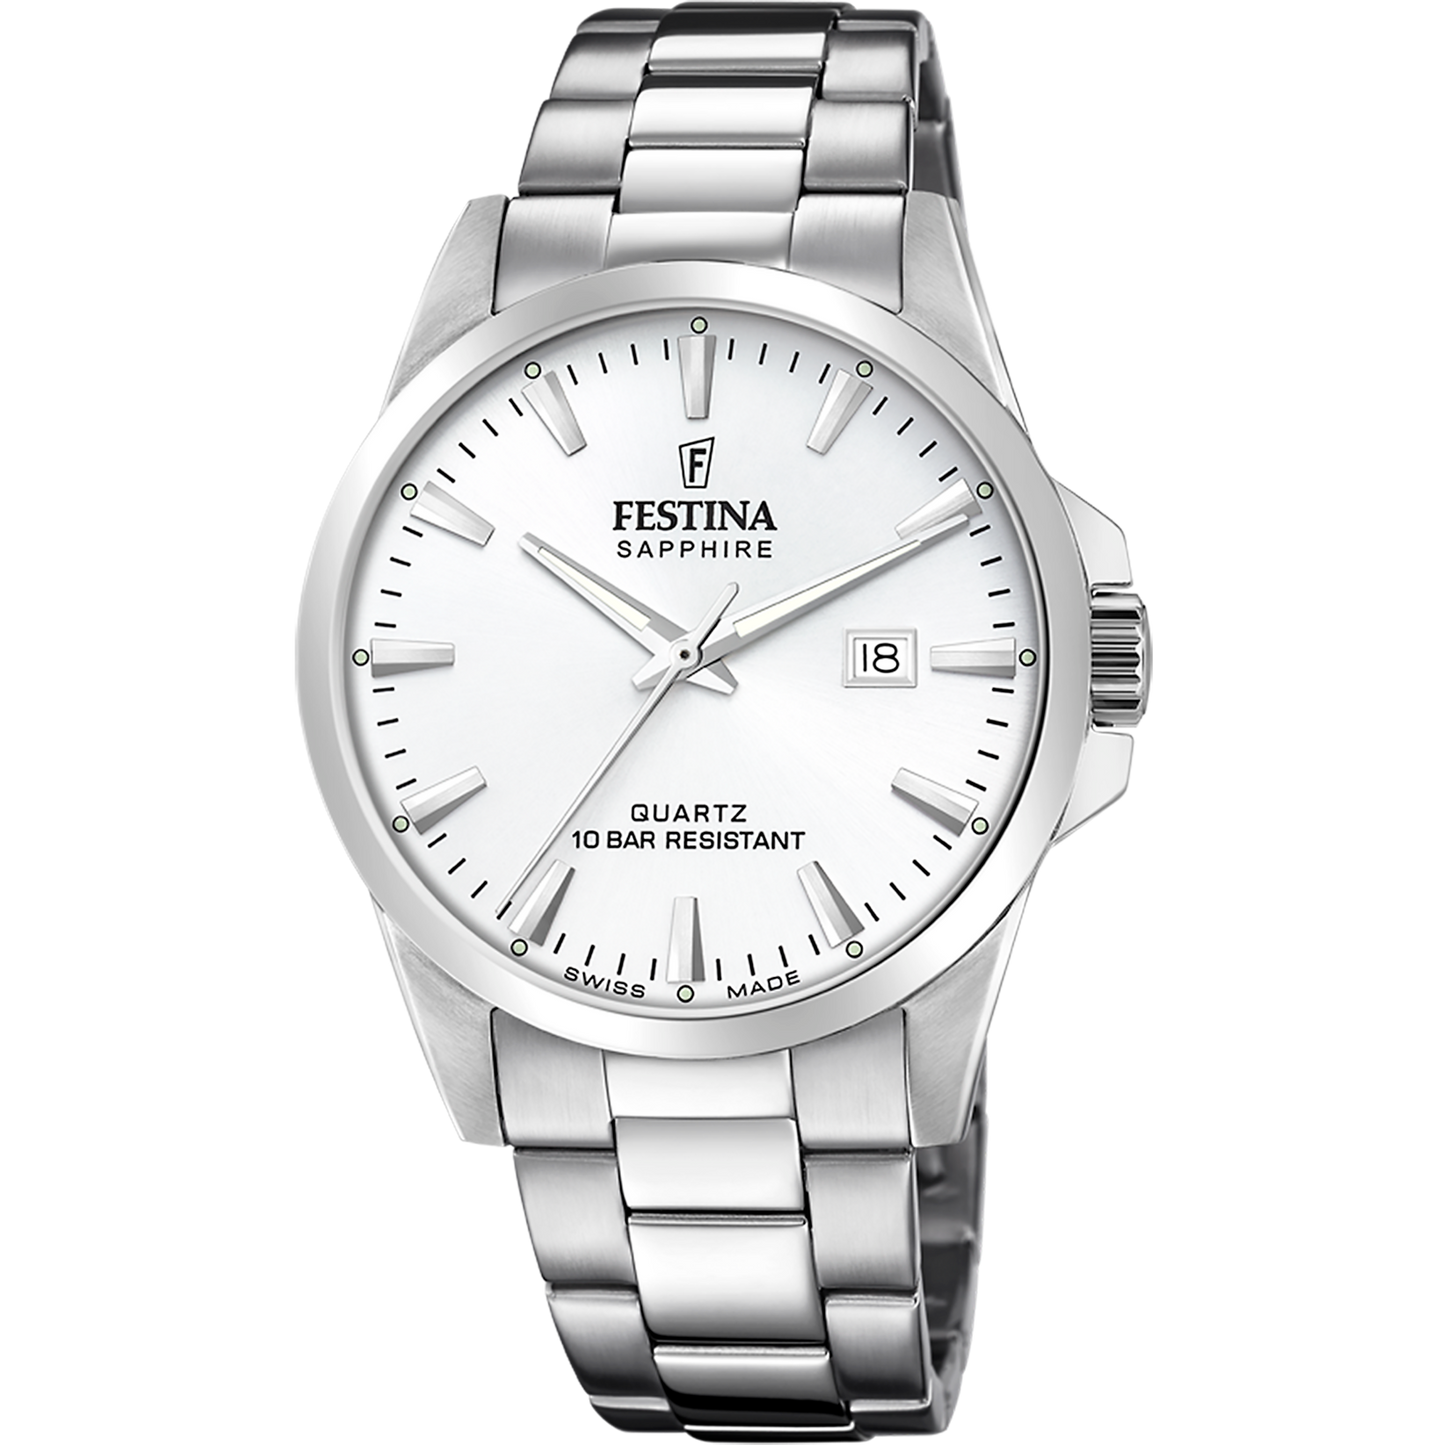 Festina Swiss Made F20024-2 - Analog - Strap Material Stainless Steel I Festina Watches USA